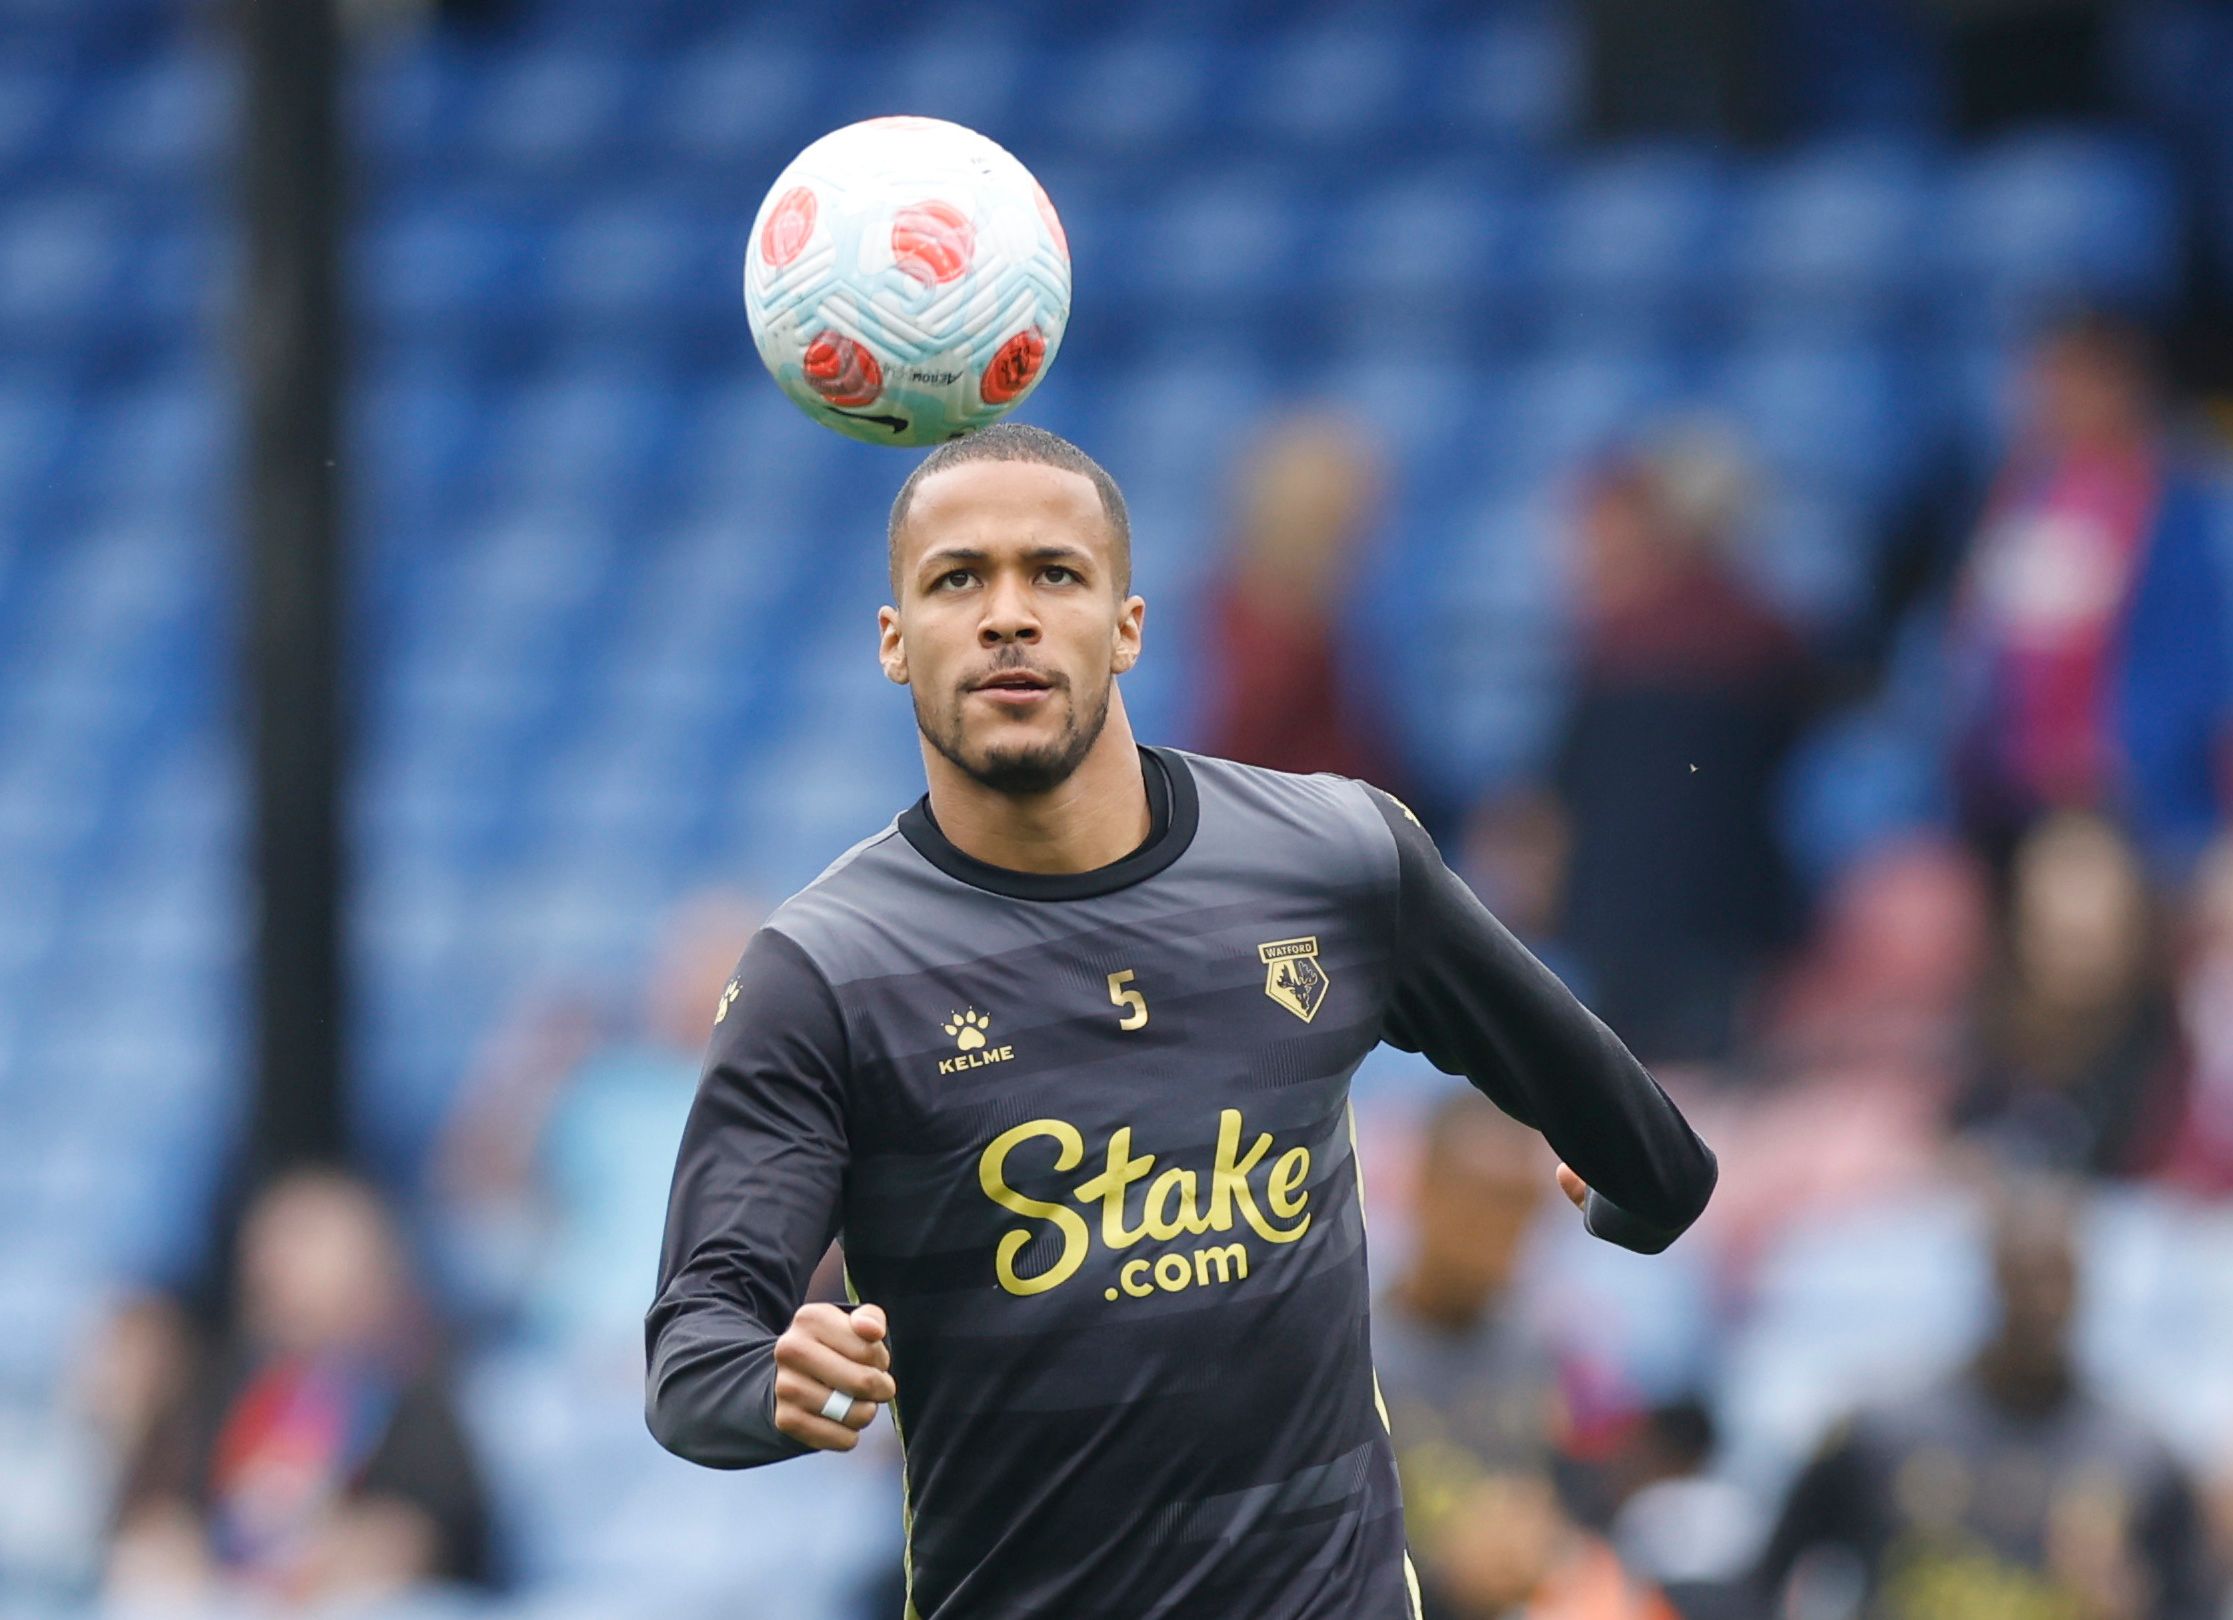 Soccer Football - Premier League - Crystal Palace v Watford - Selhurst Park, London, Britain - May 7, 2022 Watford's William Troost-Ekong during the warm up before the match Action Images via Reuters/Peter Cziborra EDITORIAL USE ONLY. No use with unauthorized audio, video, data, fixture lists, club/league logos or 'live' services. Online in-match use limited to 75 images, no video emulation. No use in betting, games or single club /league/player publications.  Please contact your account represe